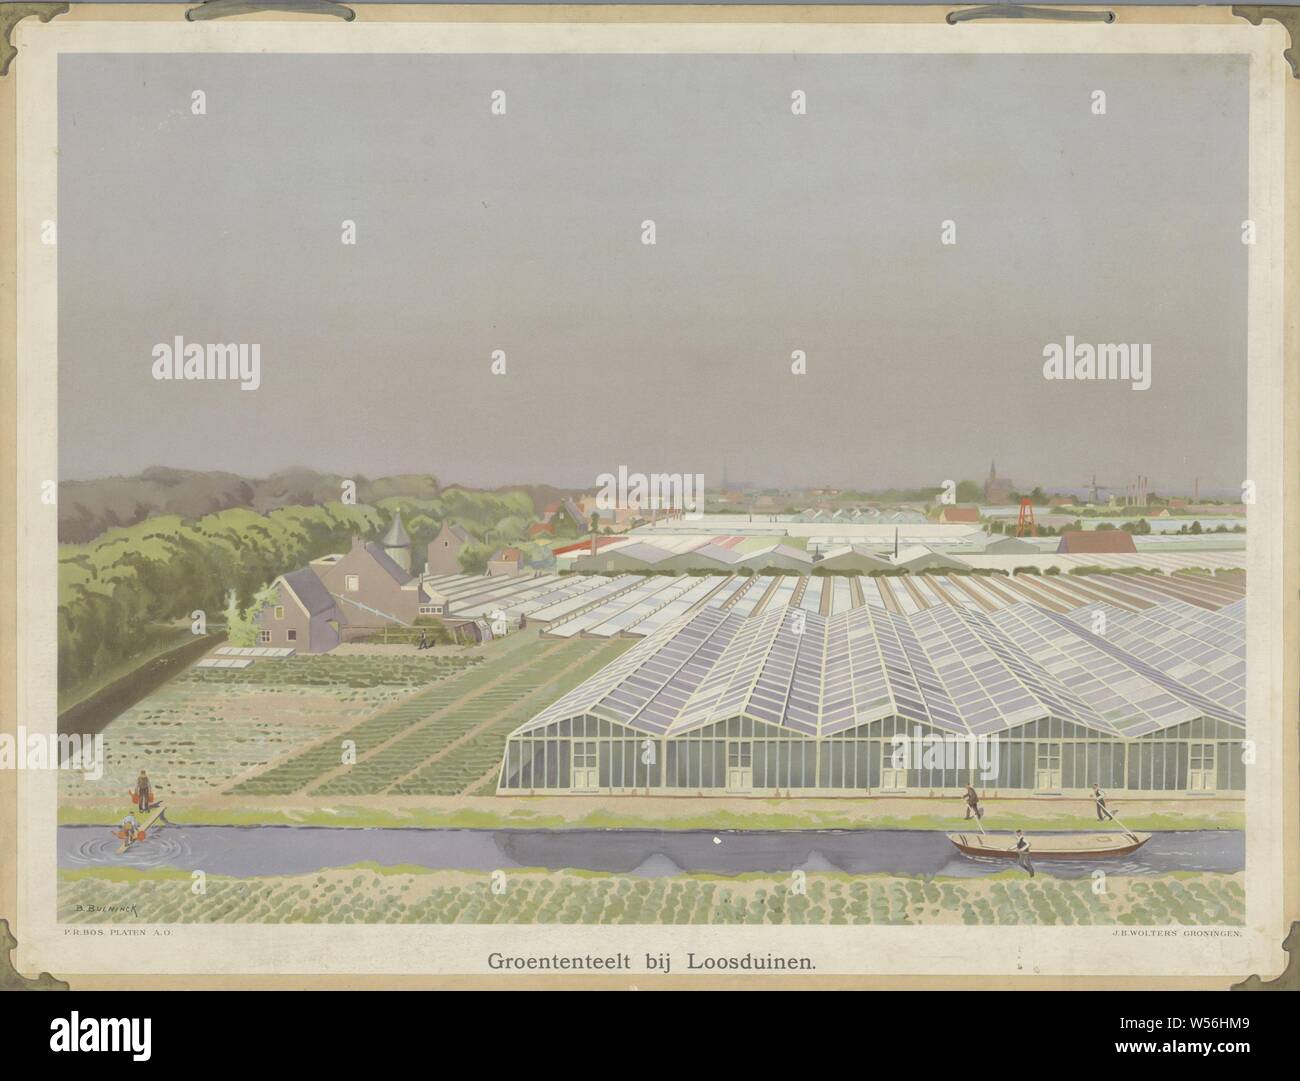 Vegetable growing at Loosduinen (title on object), Colored school plate, glued on, with copper fittings in the corners and green rope at the top through holes. greenhouse area. Signed, l.o .: B. Beuninck. Inscription, 10: P.Z. Forest. Platen AO ', Loosduinen, Bernardus Bueninck (mentioned on object), 1900 - 1950, paper, cardboard, printing, h 63.5 cm × w 83.5 cm Stock Photo